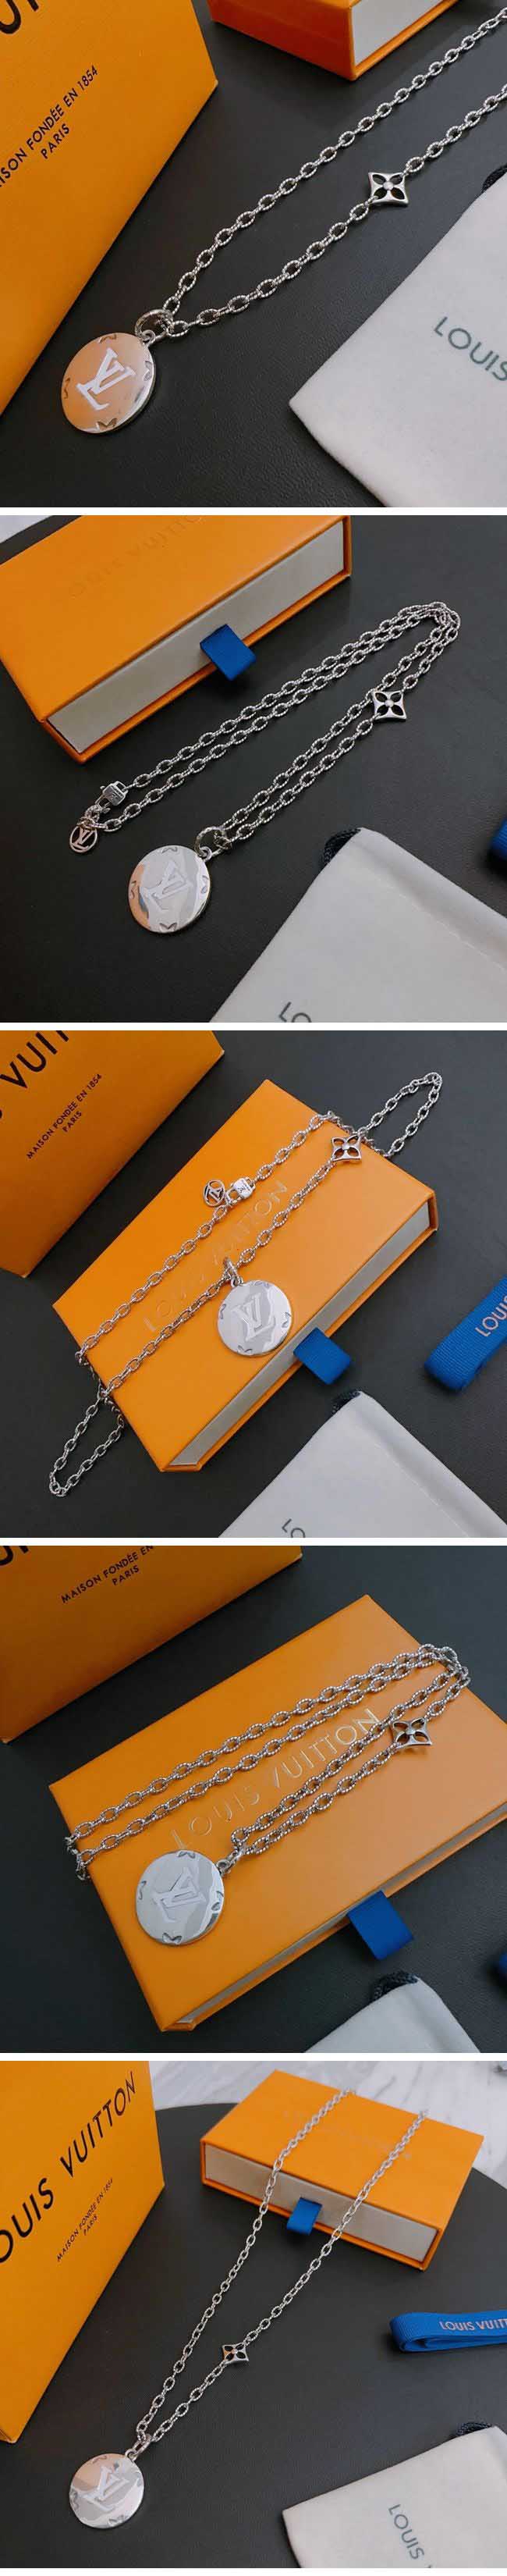 Louis Vuitton LV Coin Charm Necklace ルイヴィトン LV コイン チャーム ネックレス